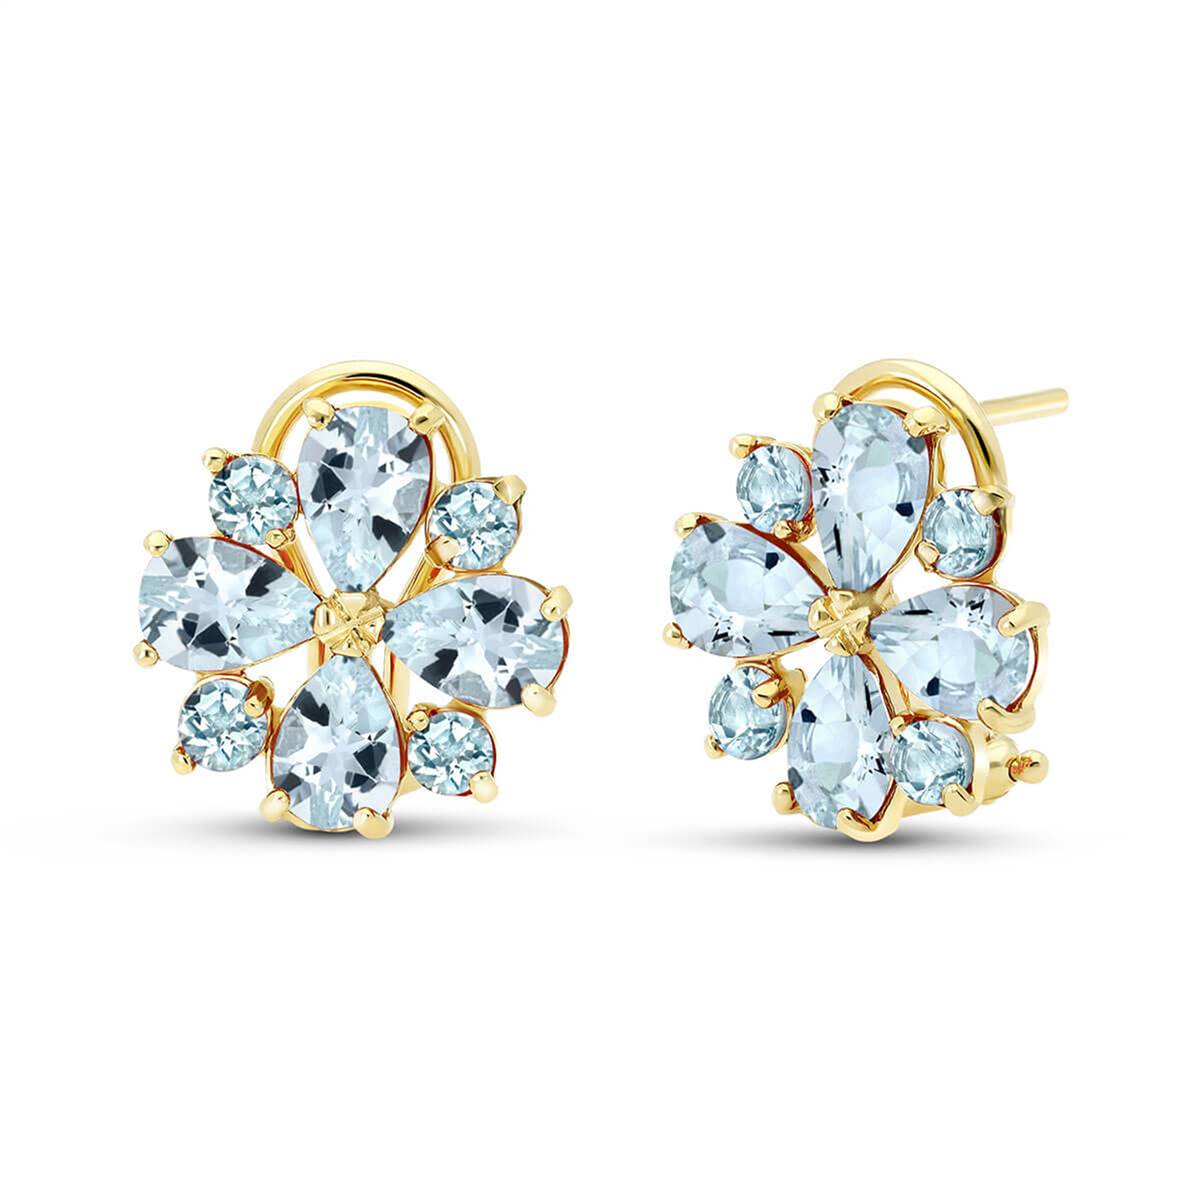 4.85 Carat 14K Solid Yellow Gold French Clips Earrings Natural Aquamarine